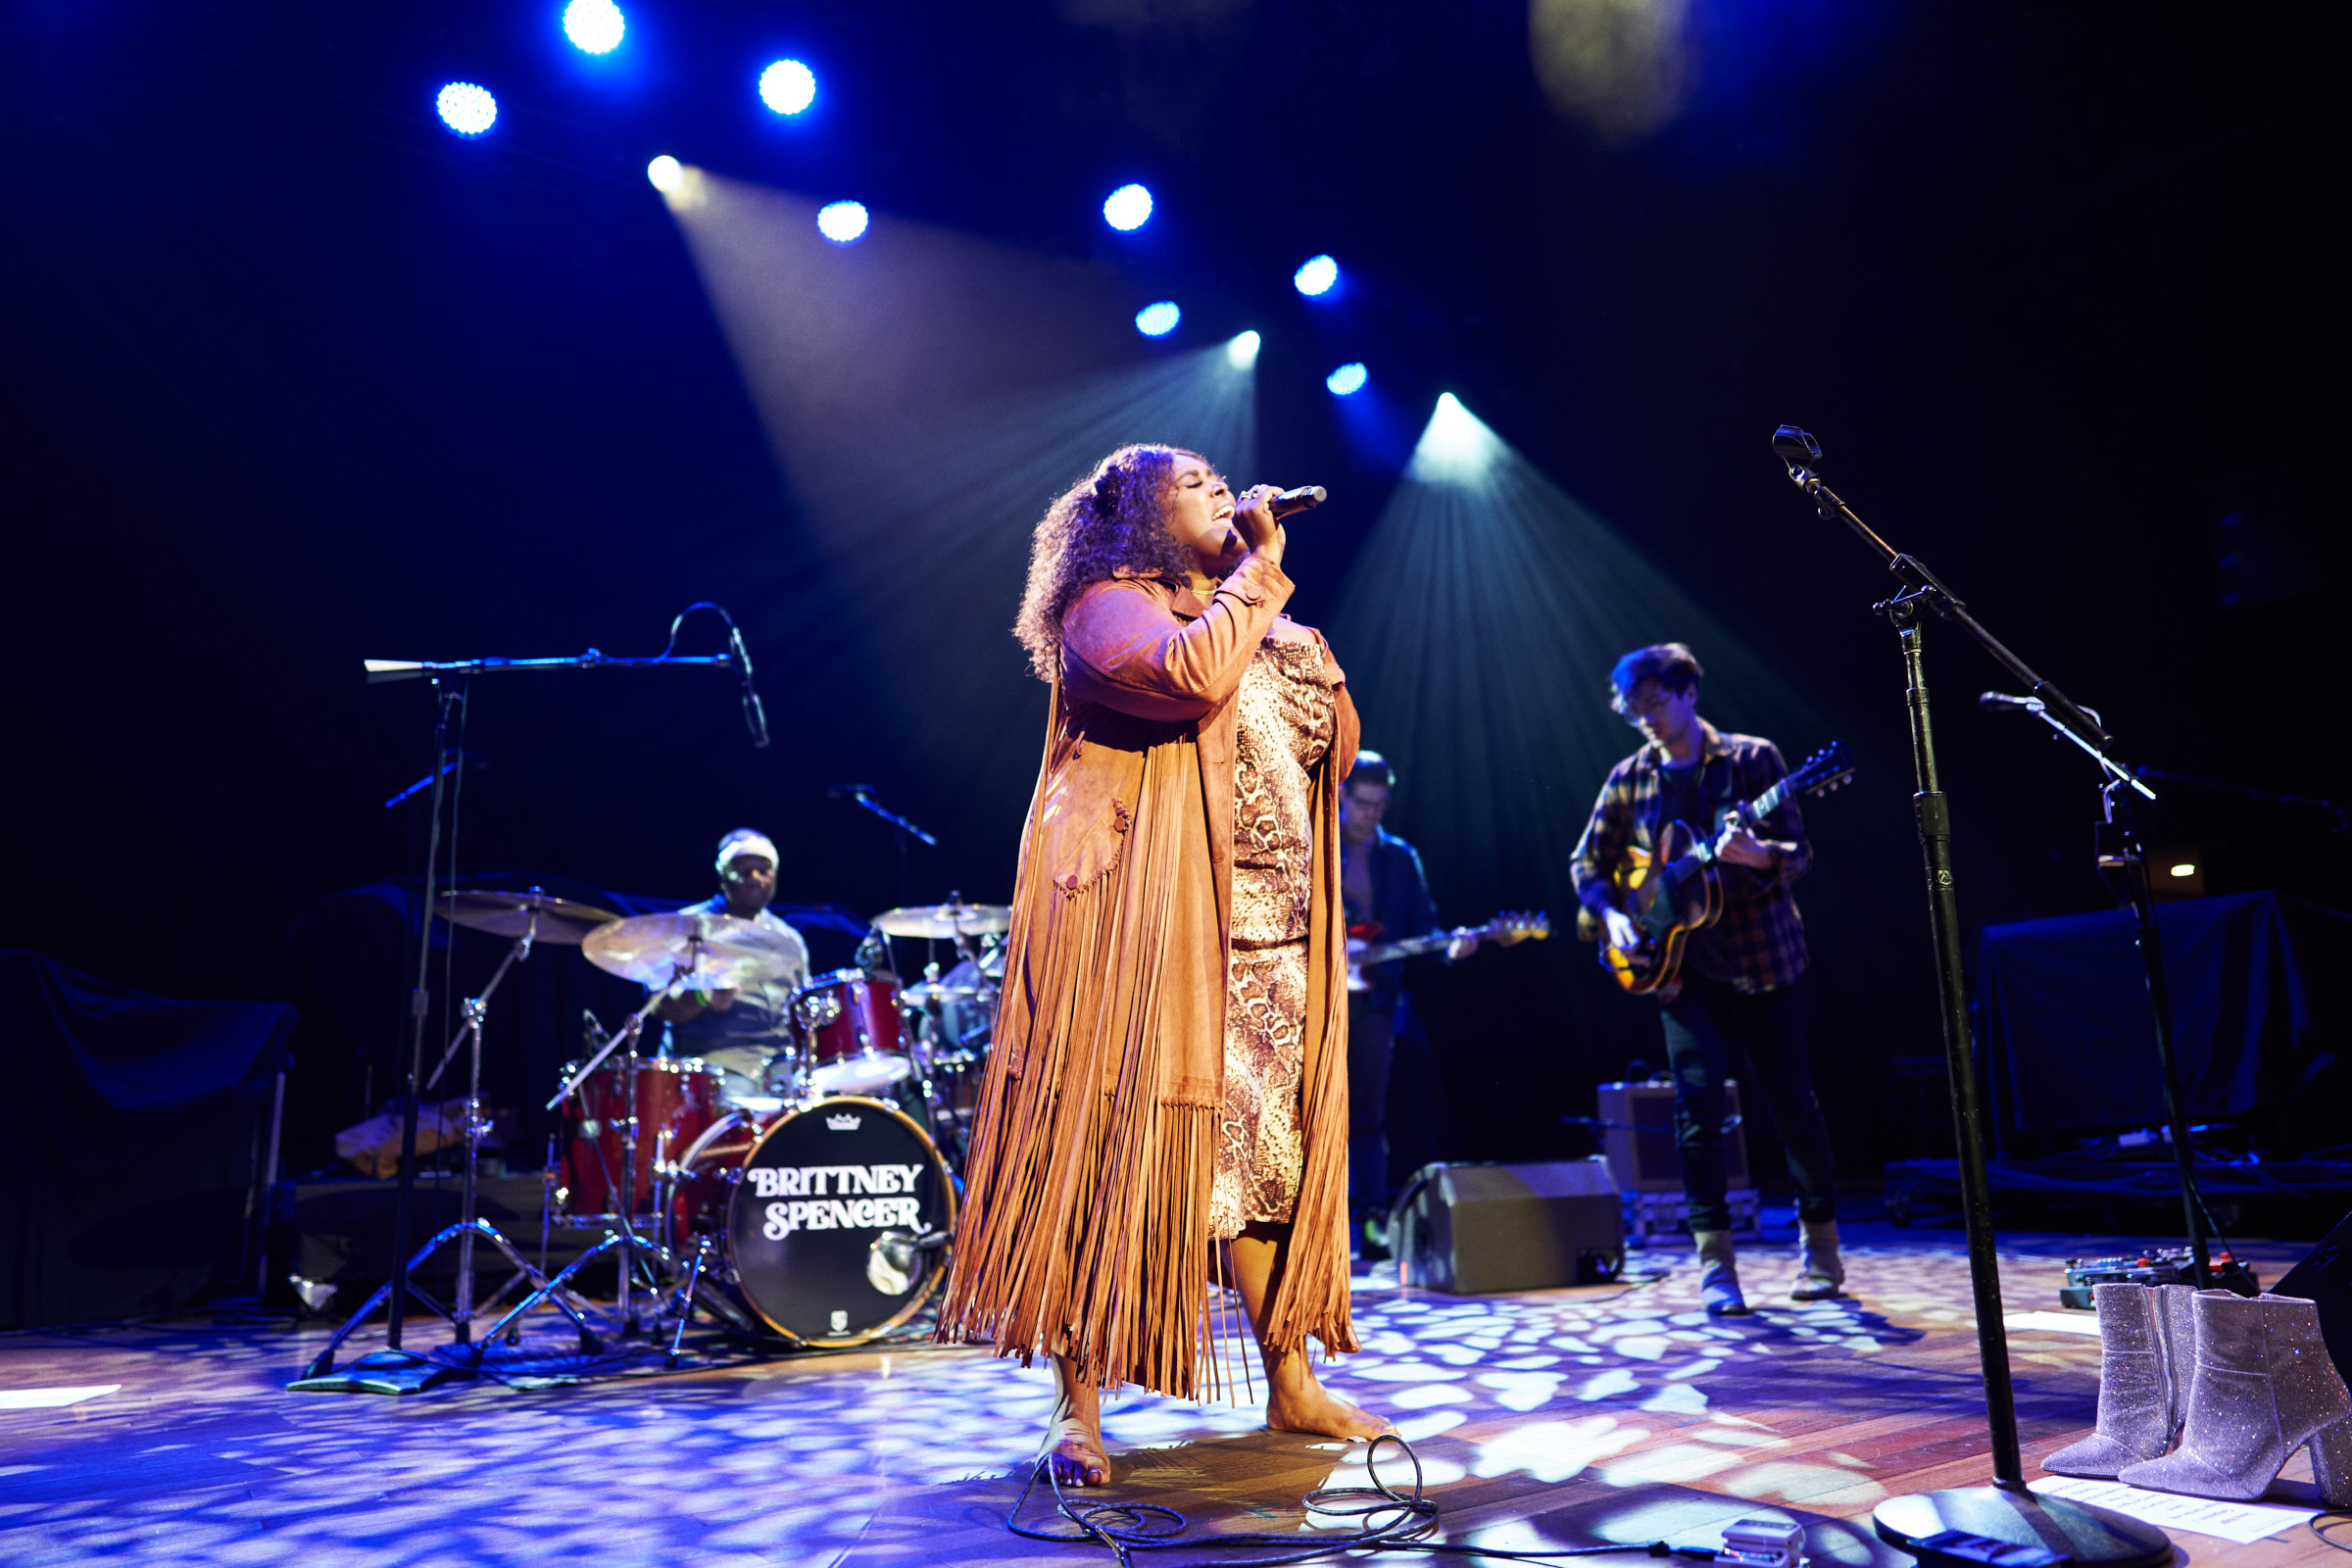 Four bandmates perform onstage with the singer, a Black woman wearing a full-length coat, is centered